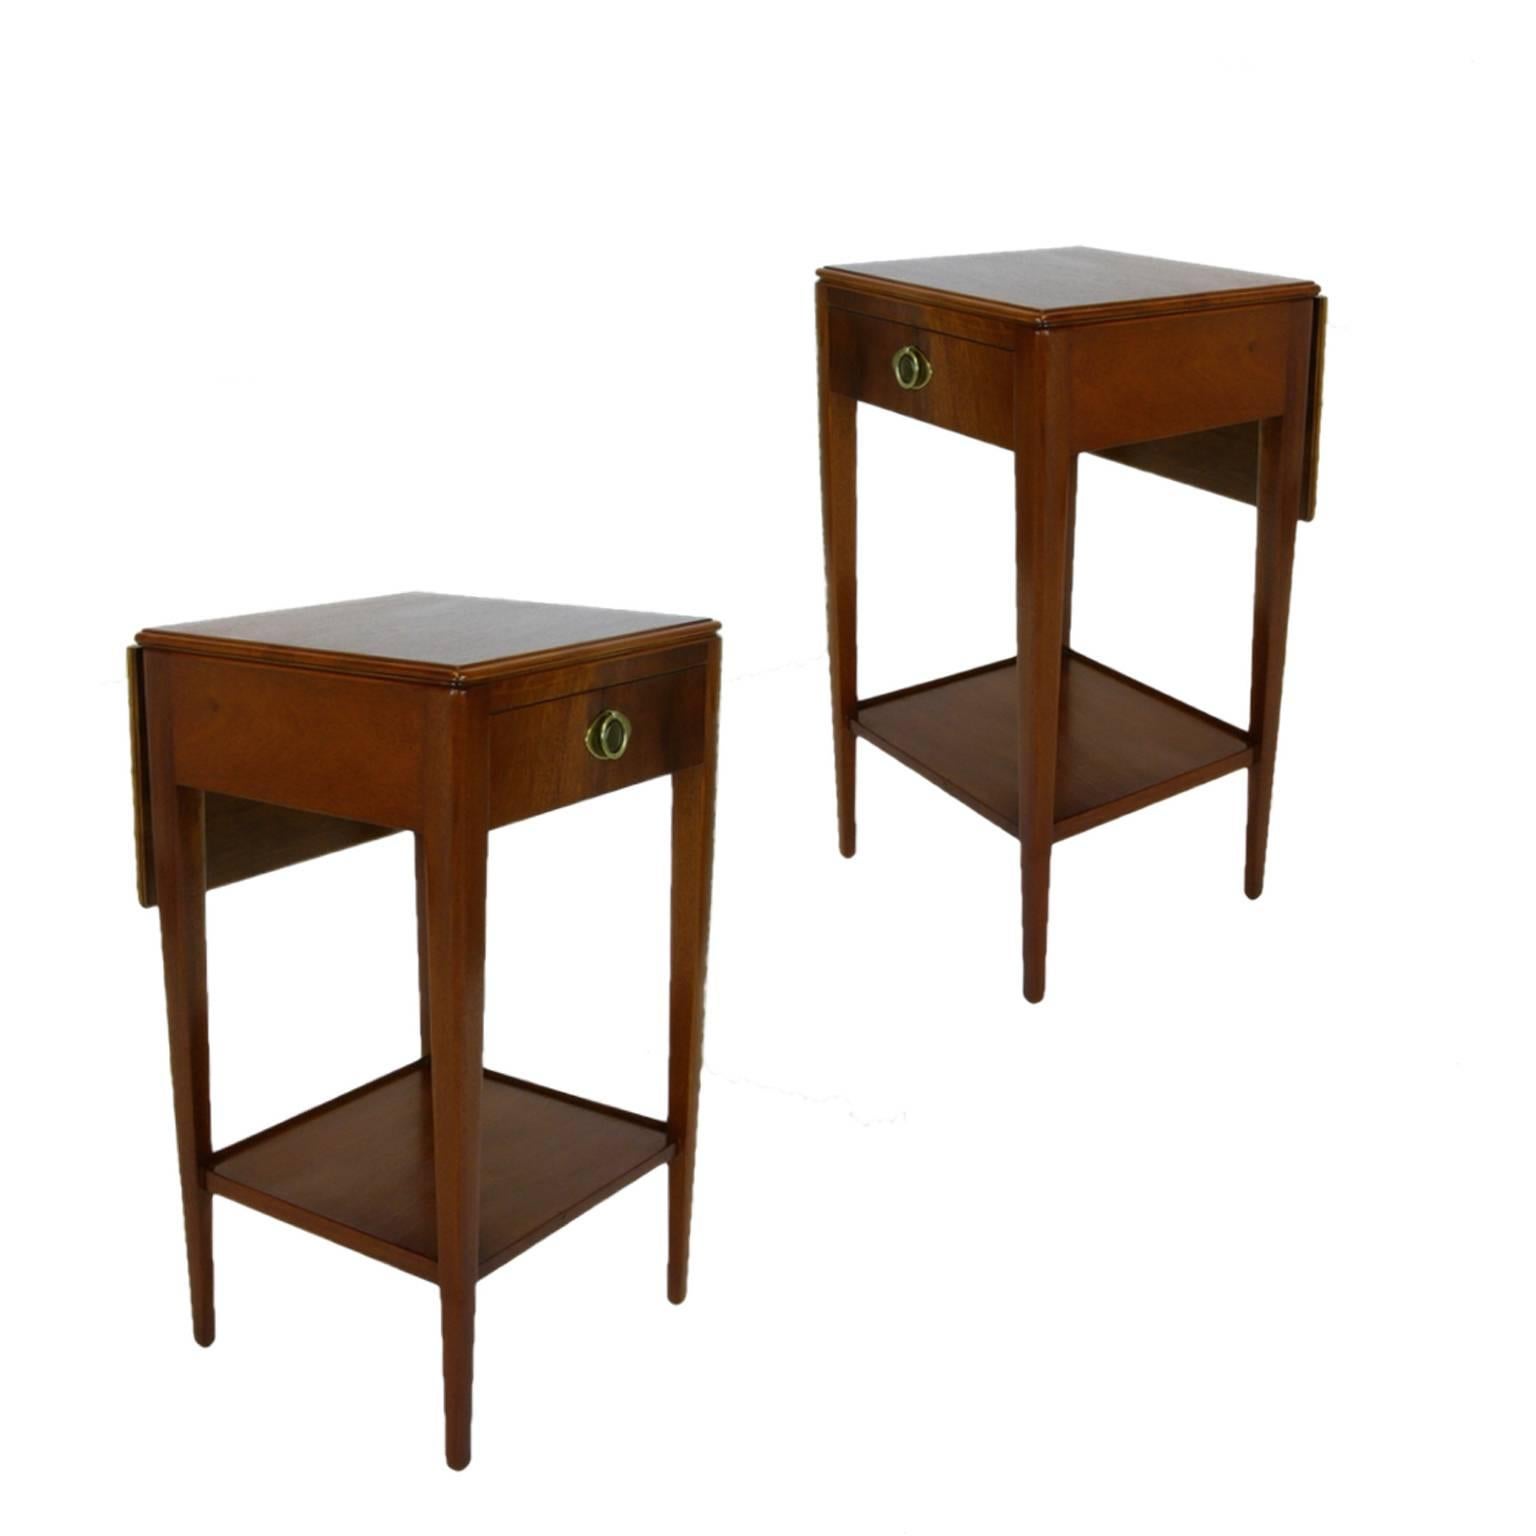 Freshly restored bedside tables by Johnson Furniture. Retailed by John Stuart. Each stand has a single drawer, a shelf and a 10